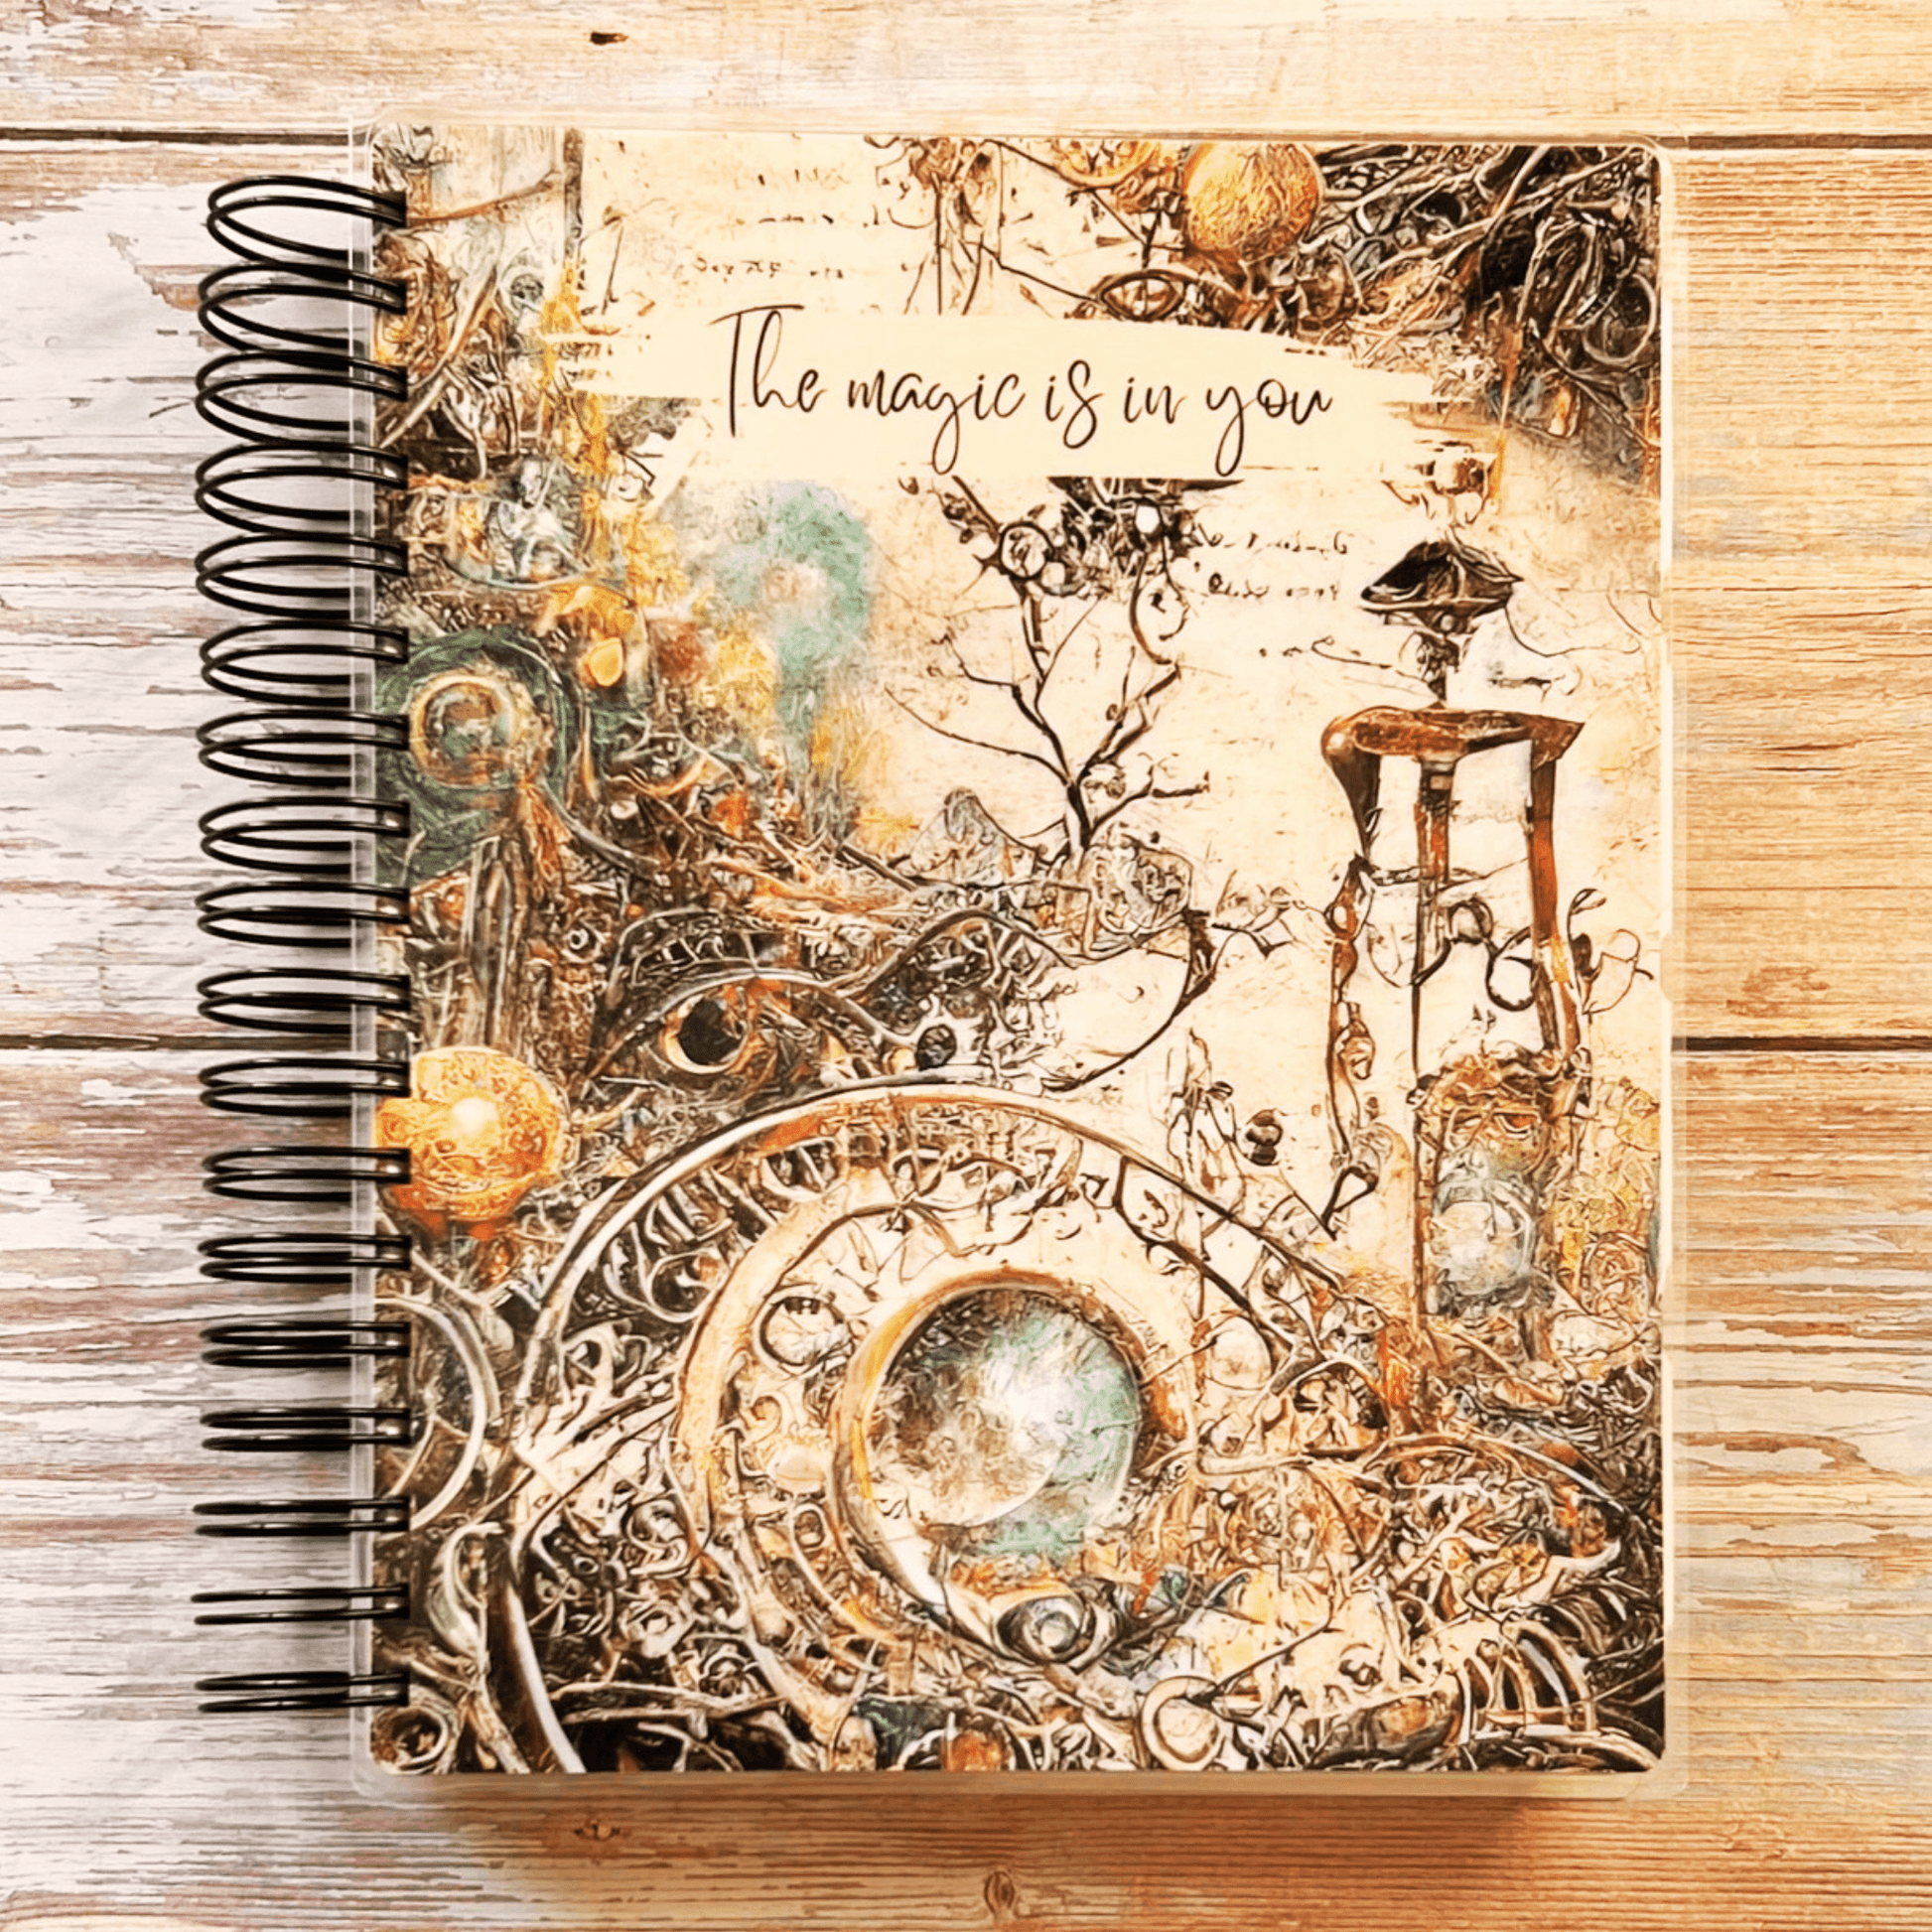 2023-2024 Personalized Monthly Planner - Mystical Magic Monthly Planners Artful Planner Co. July-2023 20 Meal Planner Pages added to back +$3.00 